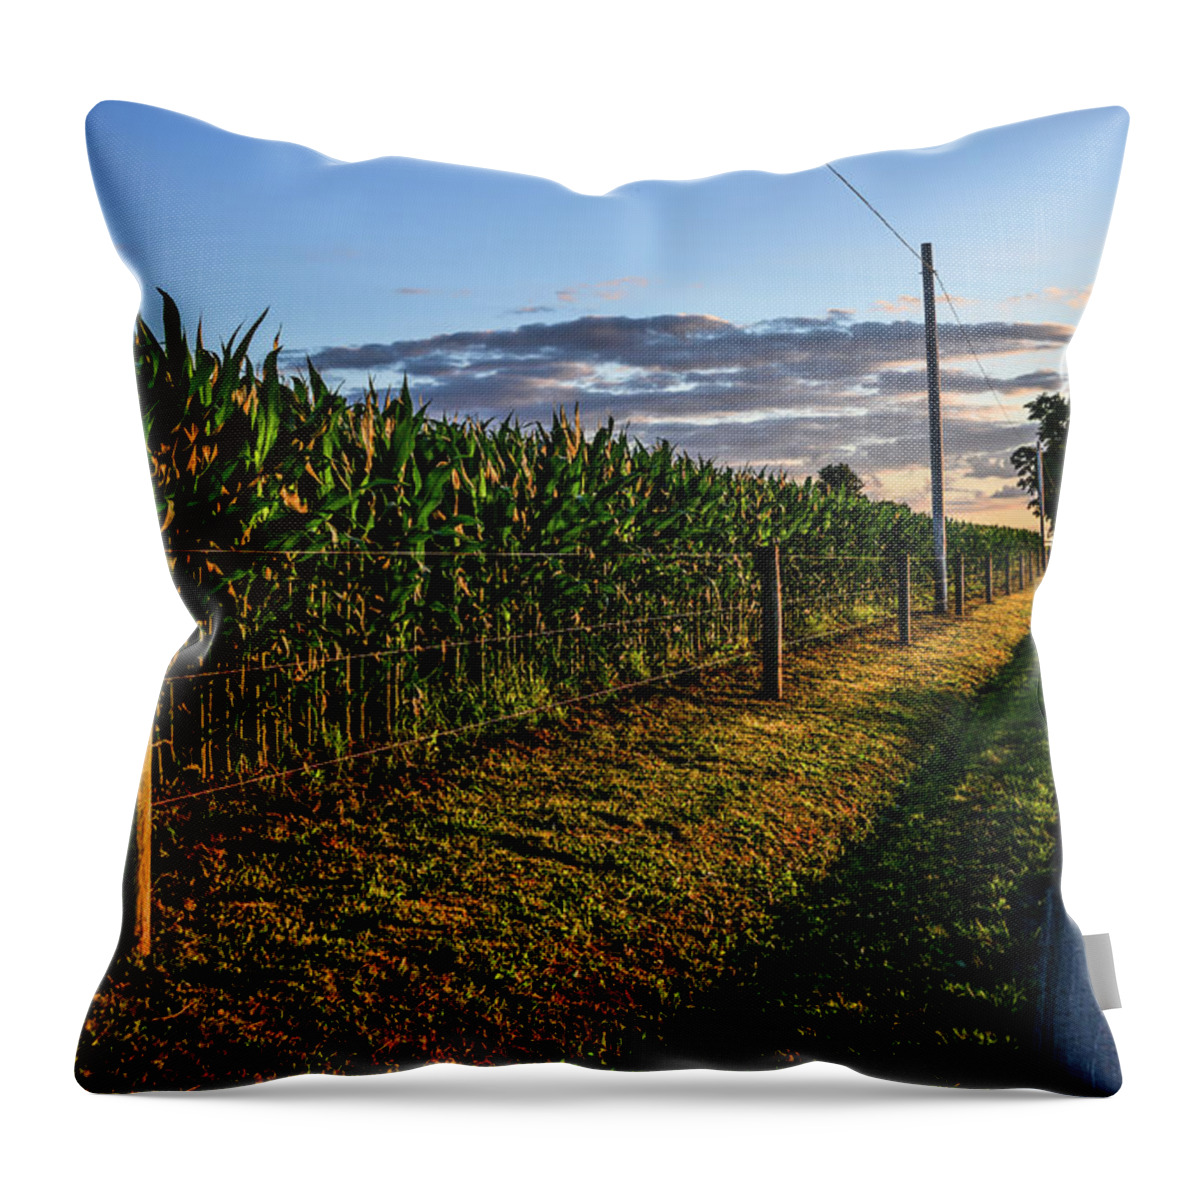 Golden Hour Throw Pillow featuring the photograph Sundrenched Cornfield by Tana Reiff